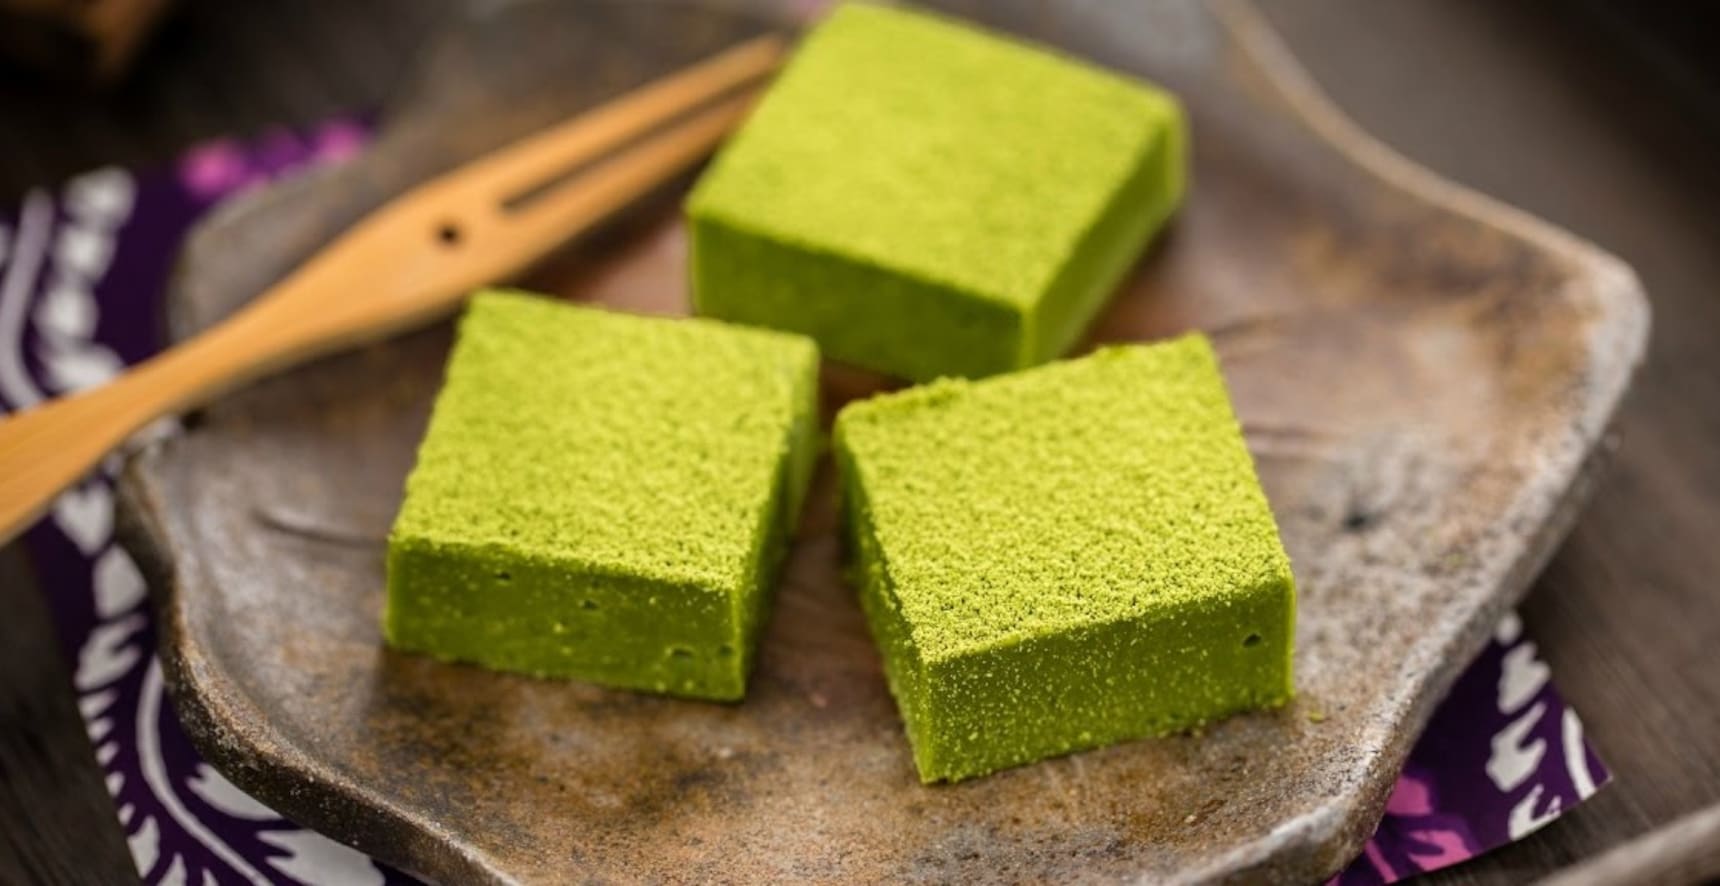 Try Making These Tantalizing Green Tea Treats